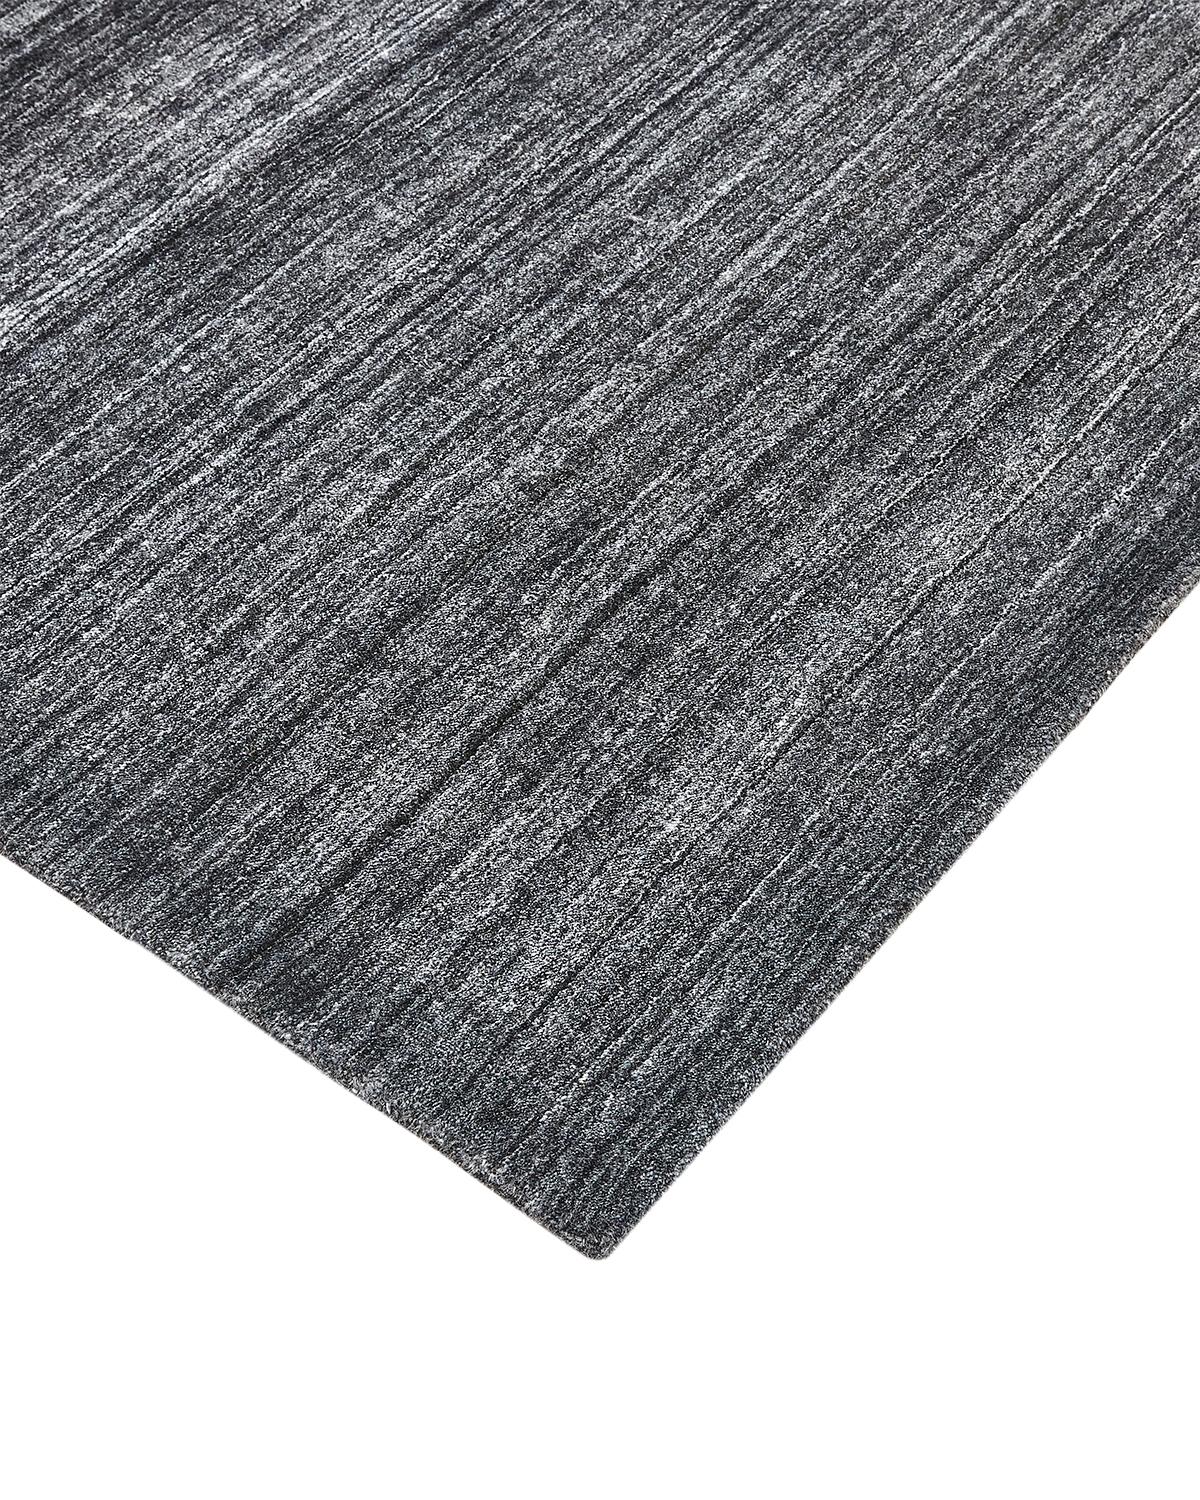 Tone-on-tone stripes give the Solid collection depth and sophistication. These rugs introduce an unexpected but welcome jolt of color into an otherwise neutral space. Handcrafted by skilled artisans in India, they will stand up to heavy traffic for